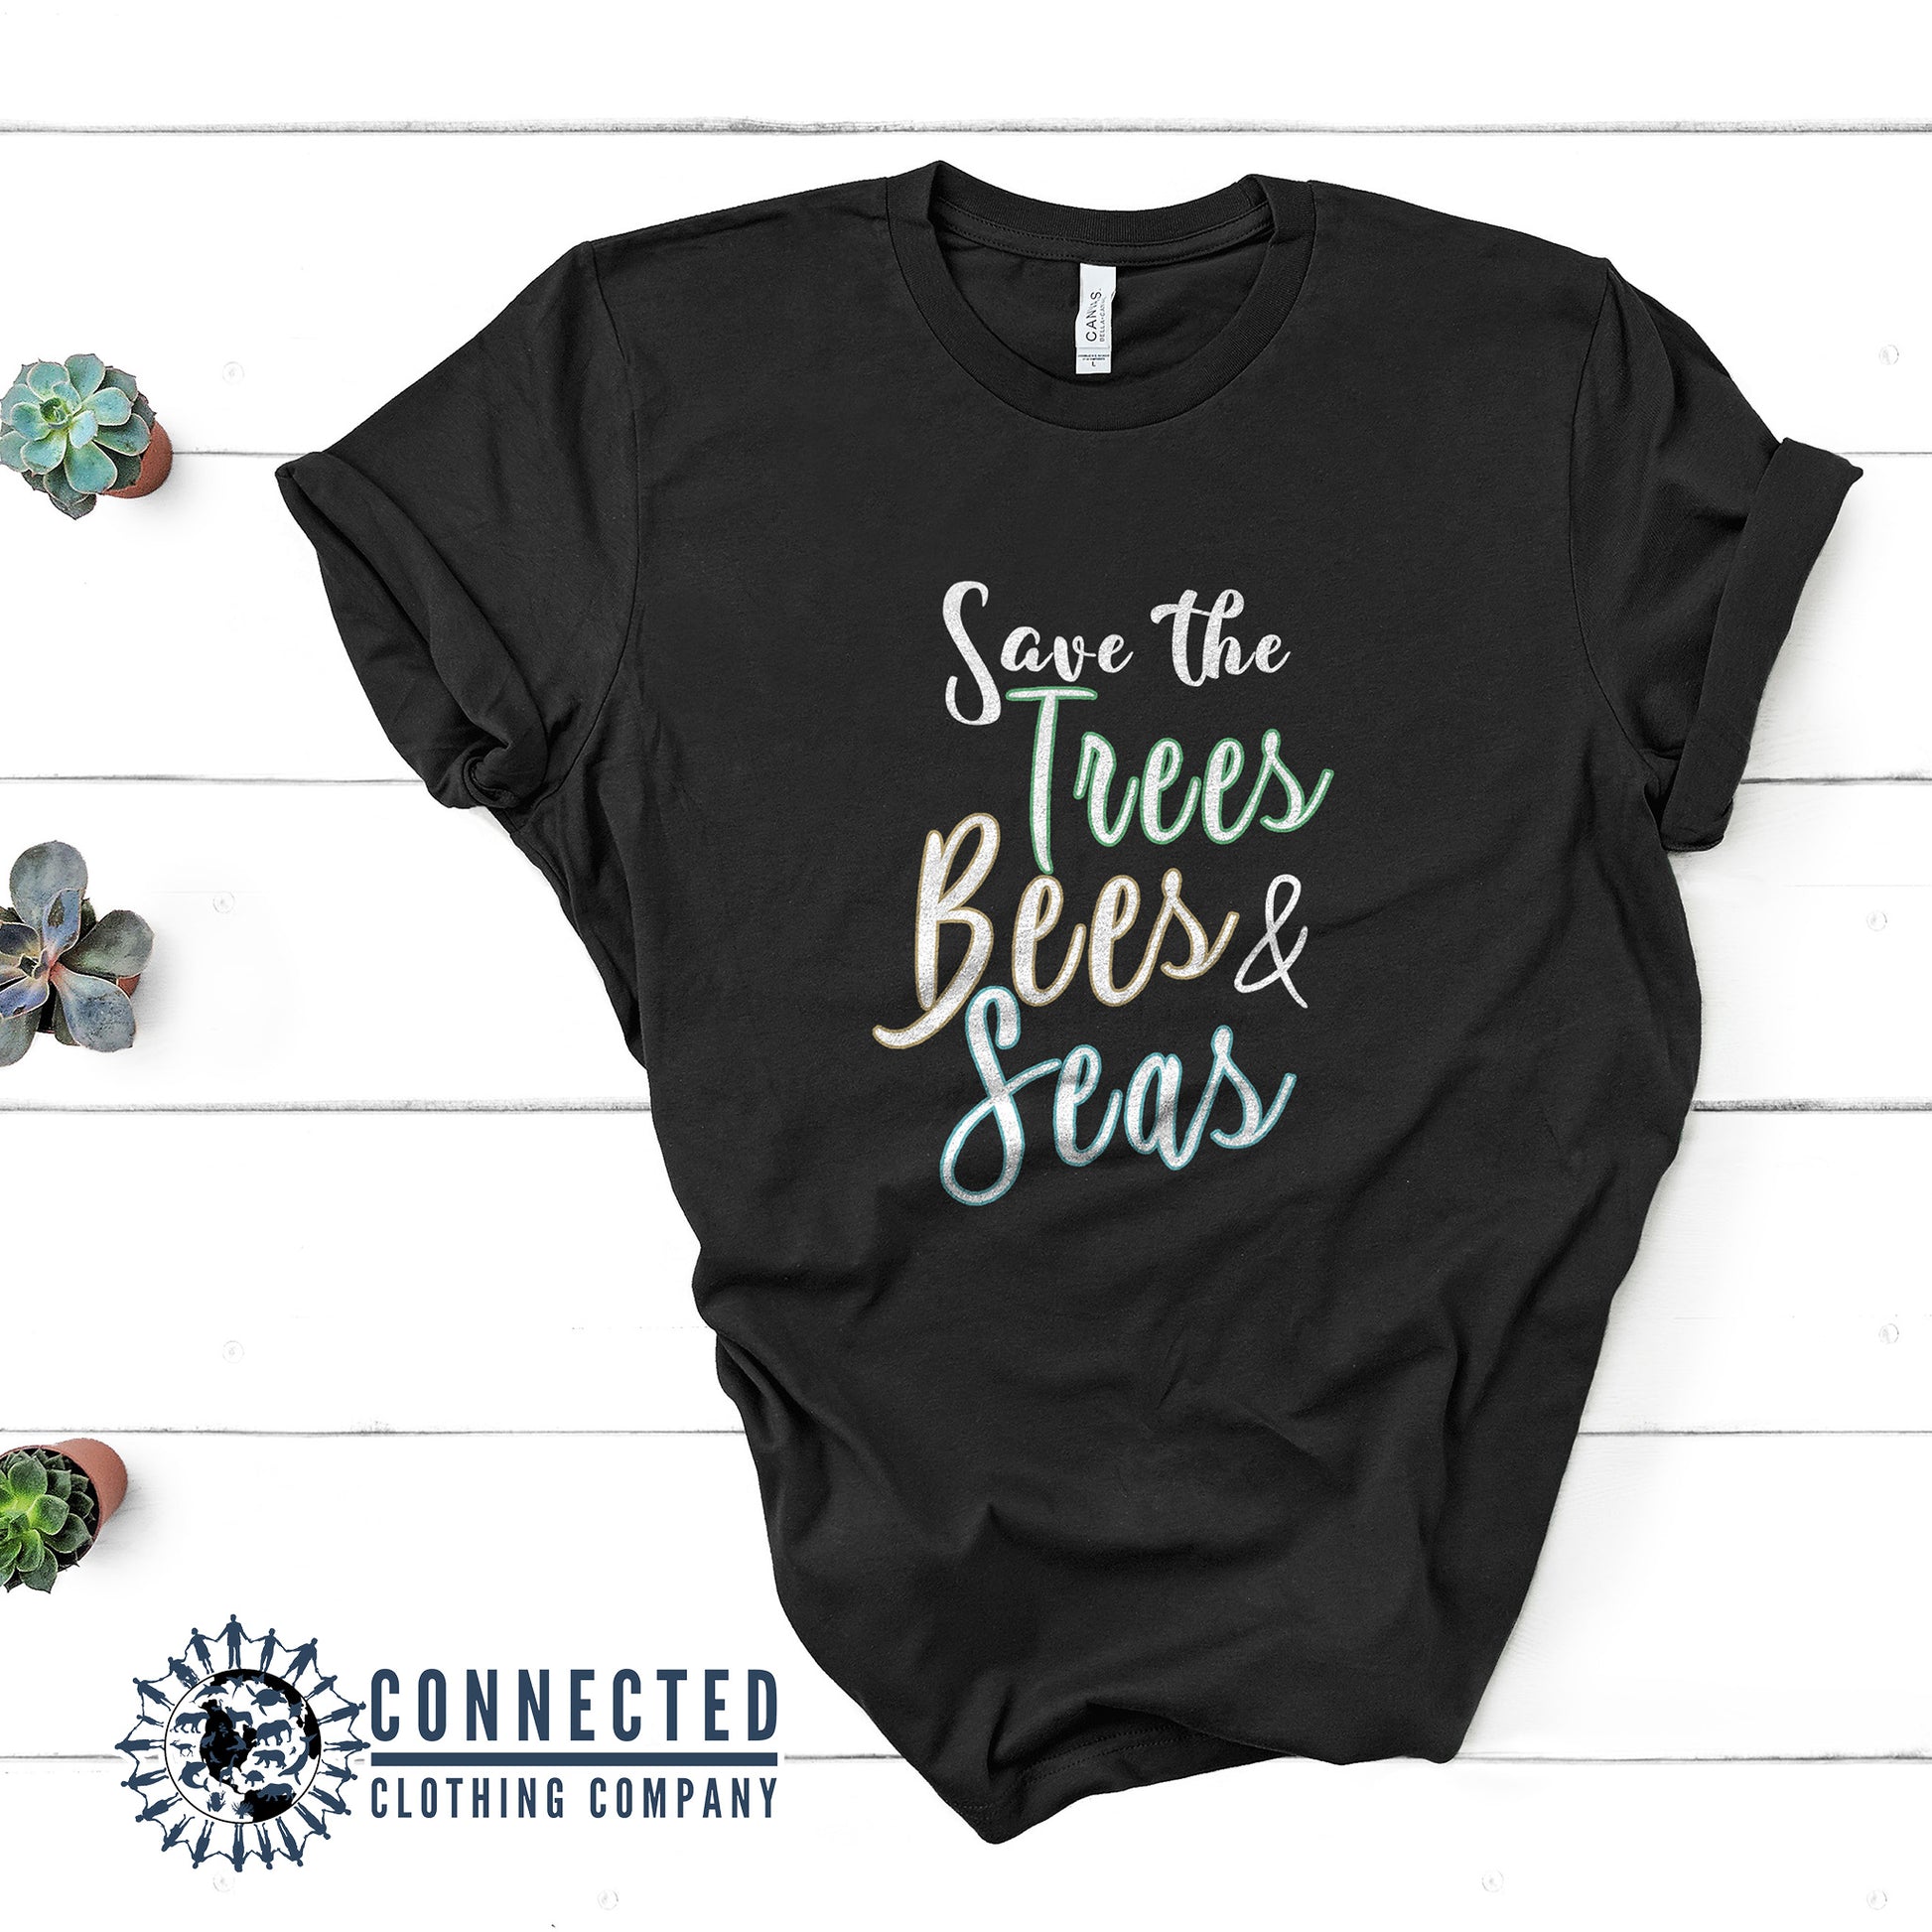 Black Save The Trees Bees & Seas Short-Sleeve Tee - sweetsherriloudesigns - Ethically and Sustainably Made - 10% donated to ocean conservation